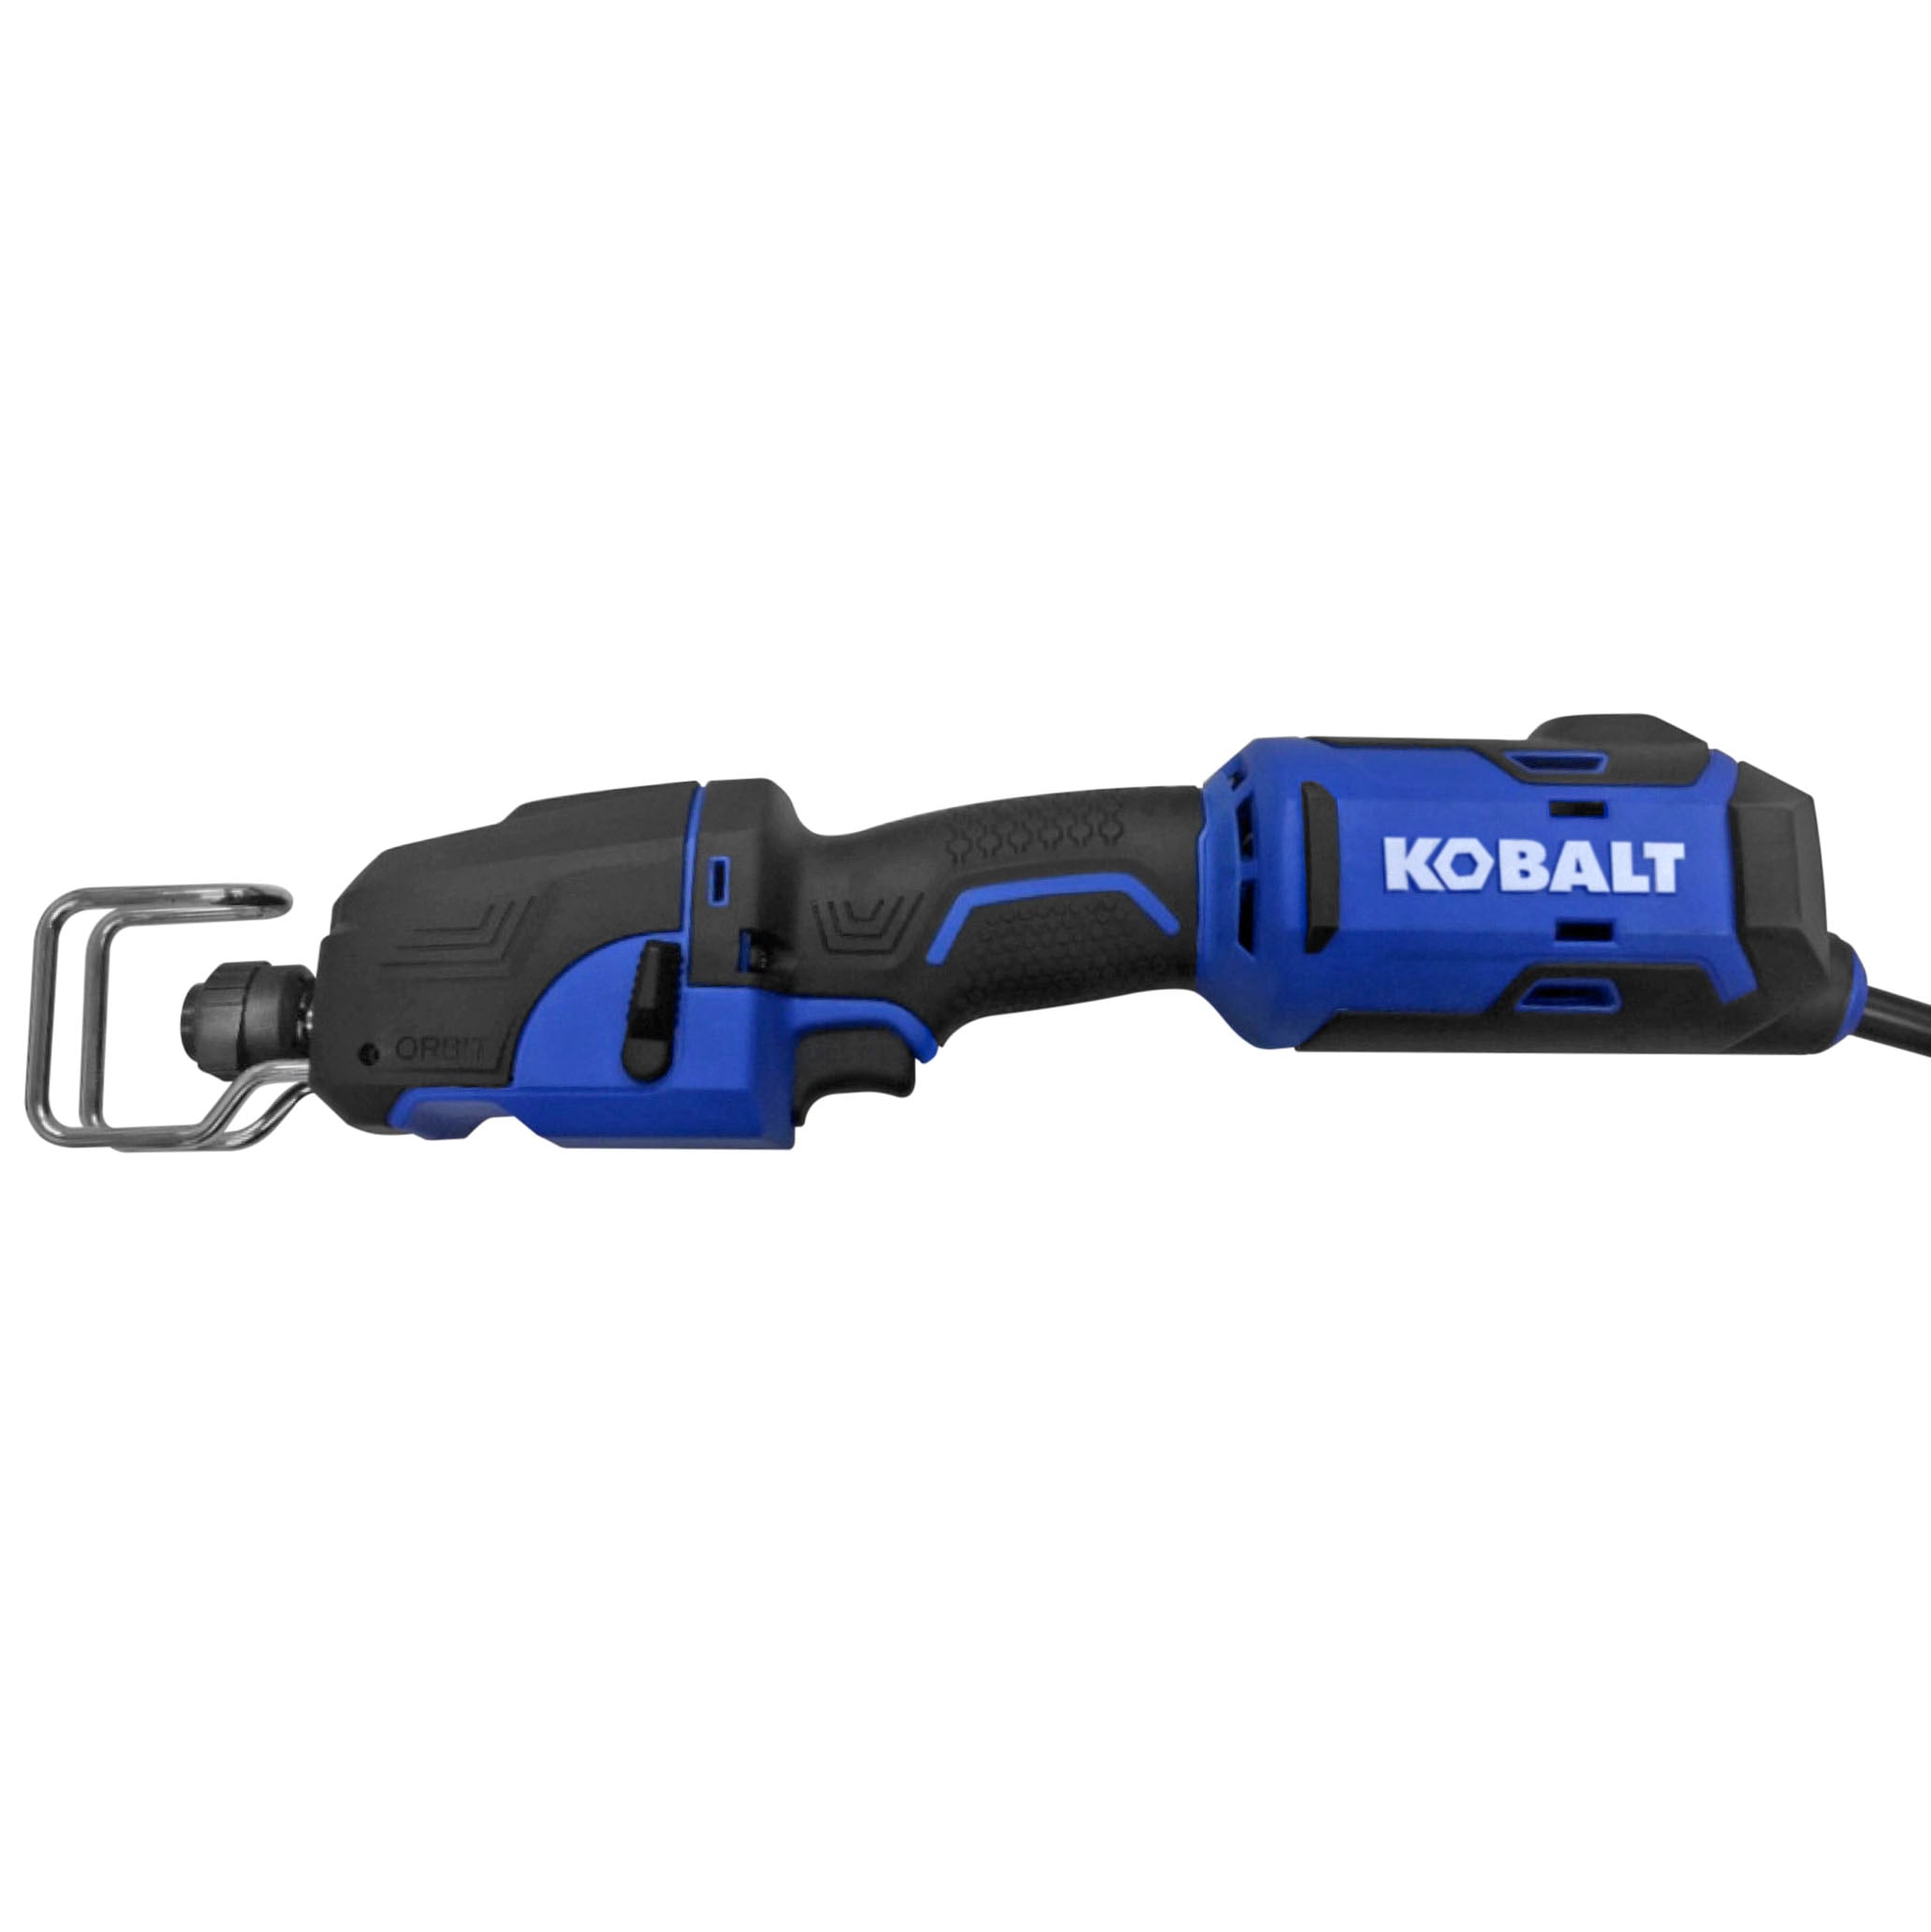 6-Amp Variable Speed Corded Reciprocating Saw | - Kobalt K6RS-06A